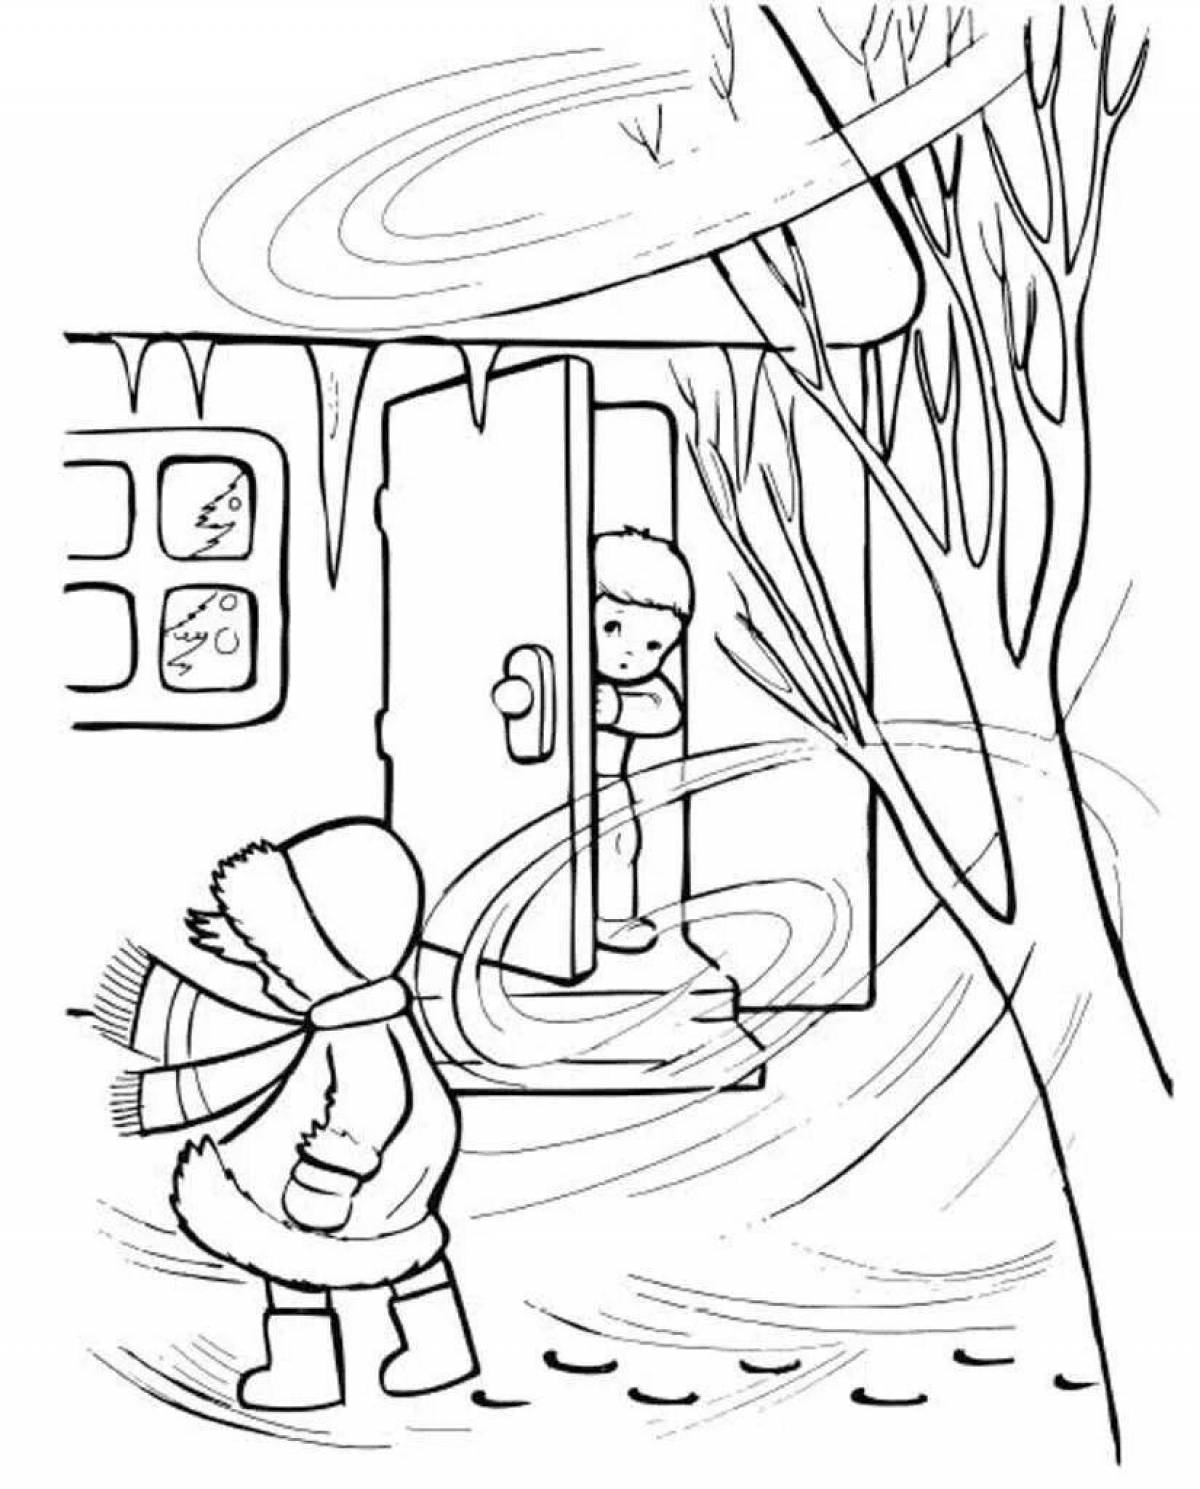 Playful winter safety coloring page